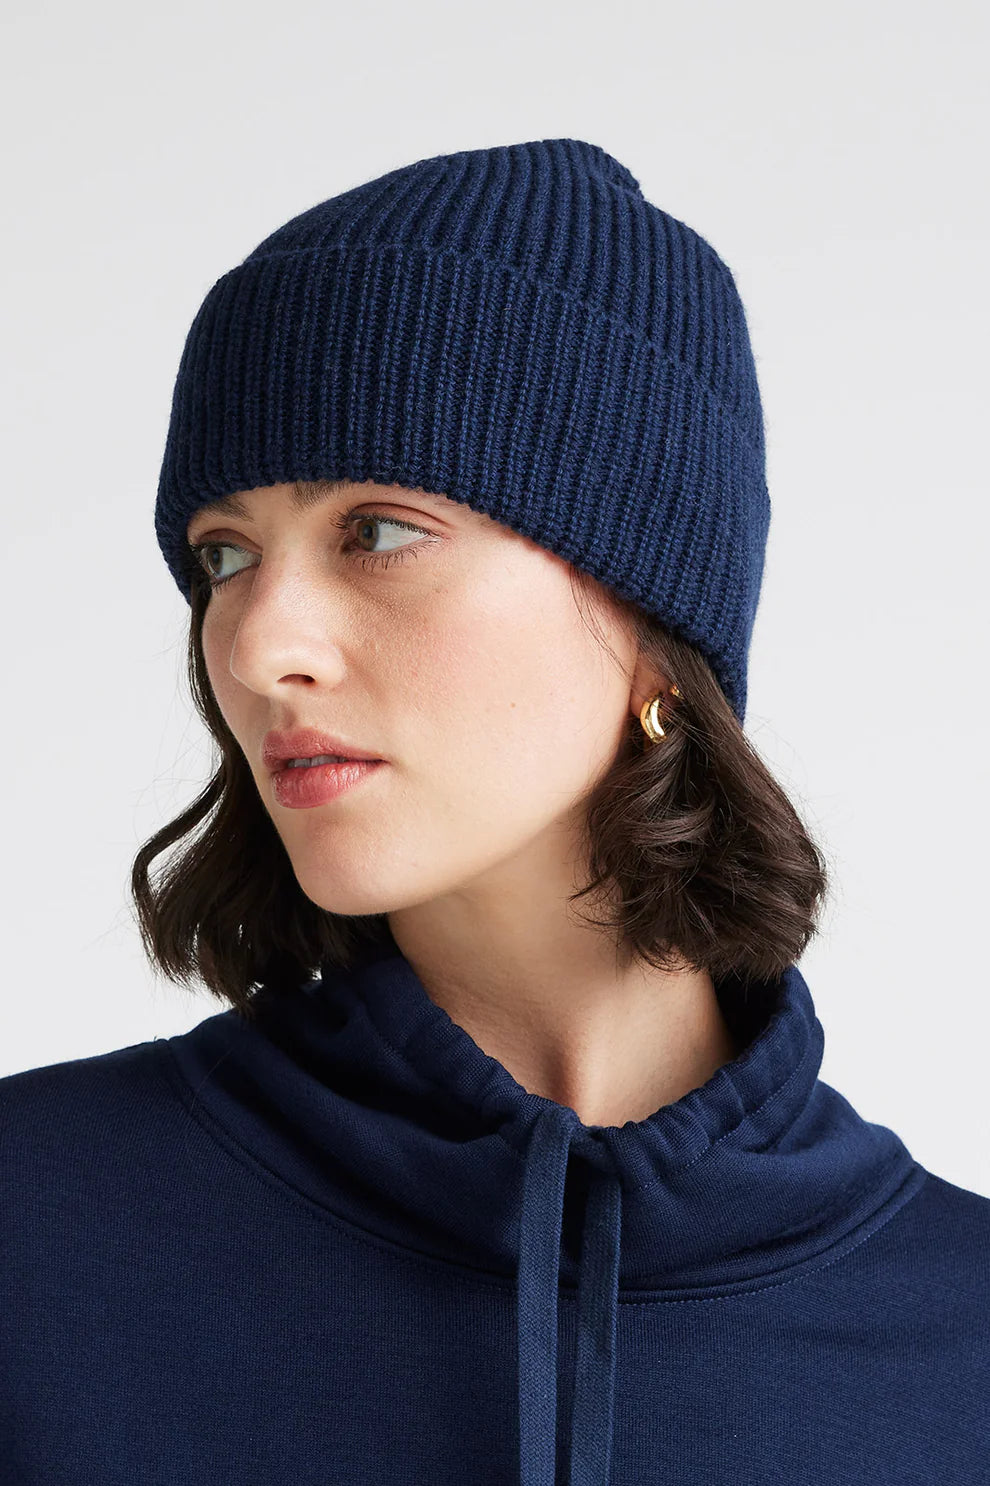 Discover warmth and style with our ribbed wool beanie. Crafted for comfort, designed for you. Get yours now!